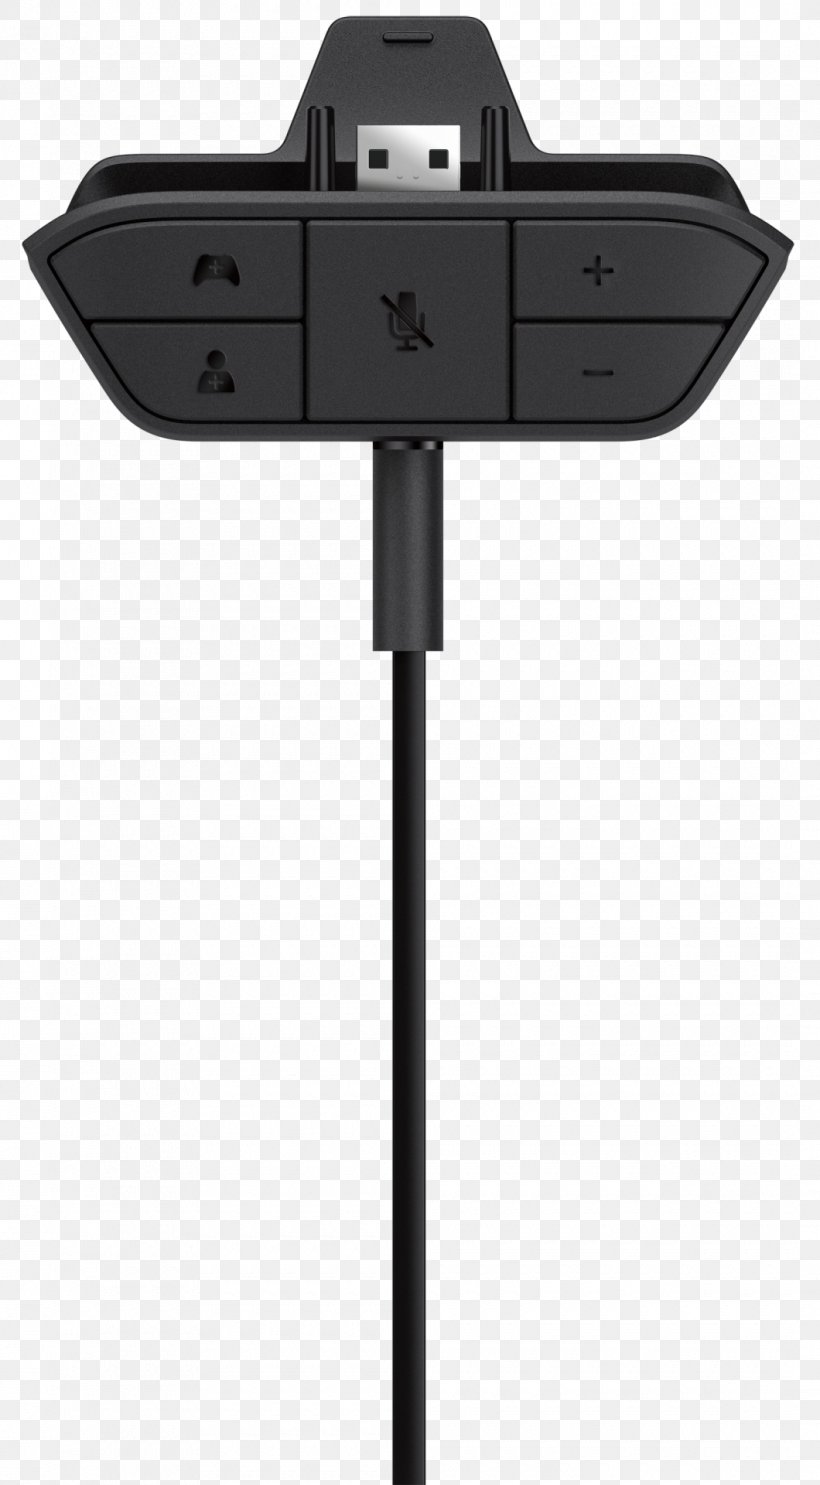 Xbox One Controller Headphones Microsoft Xbox One Stereo Headset Adapter, PNG, 1060x1920px, Xbox One Controller, Adapter, Audio, Game Controllers, Headphones Download Free